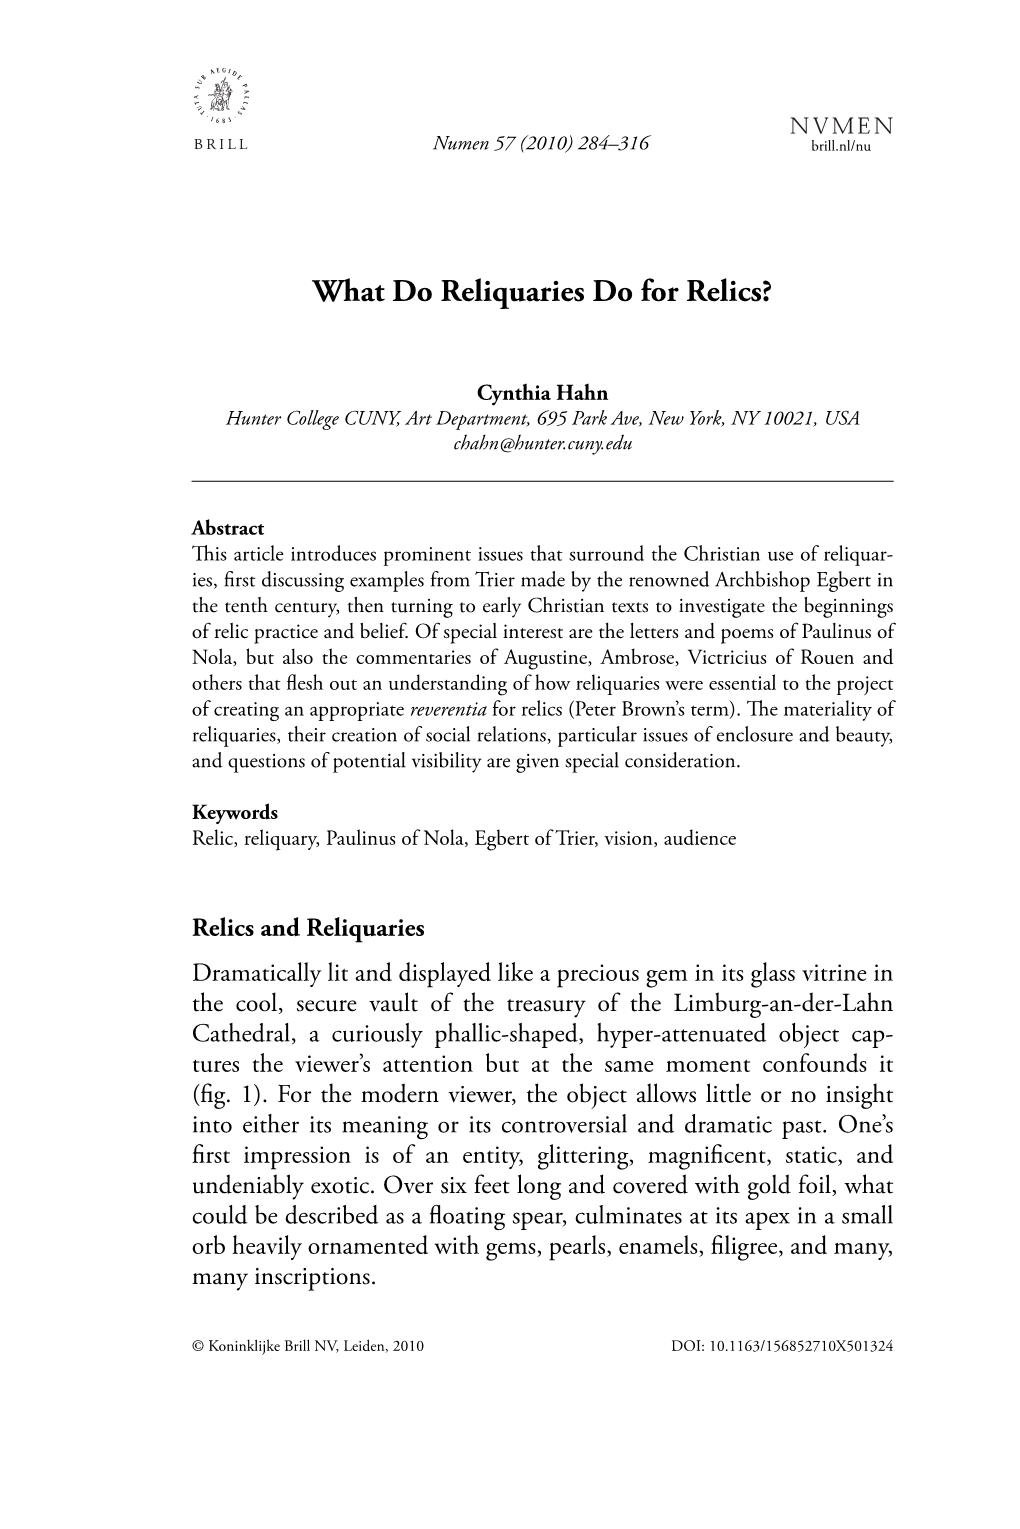 Cynthia Hahn, "What Do Reliquaries Do for Relics?